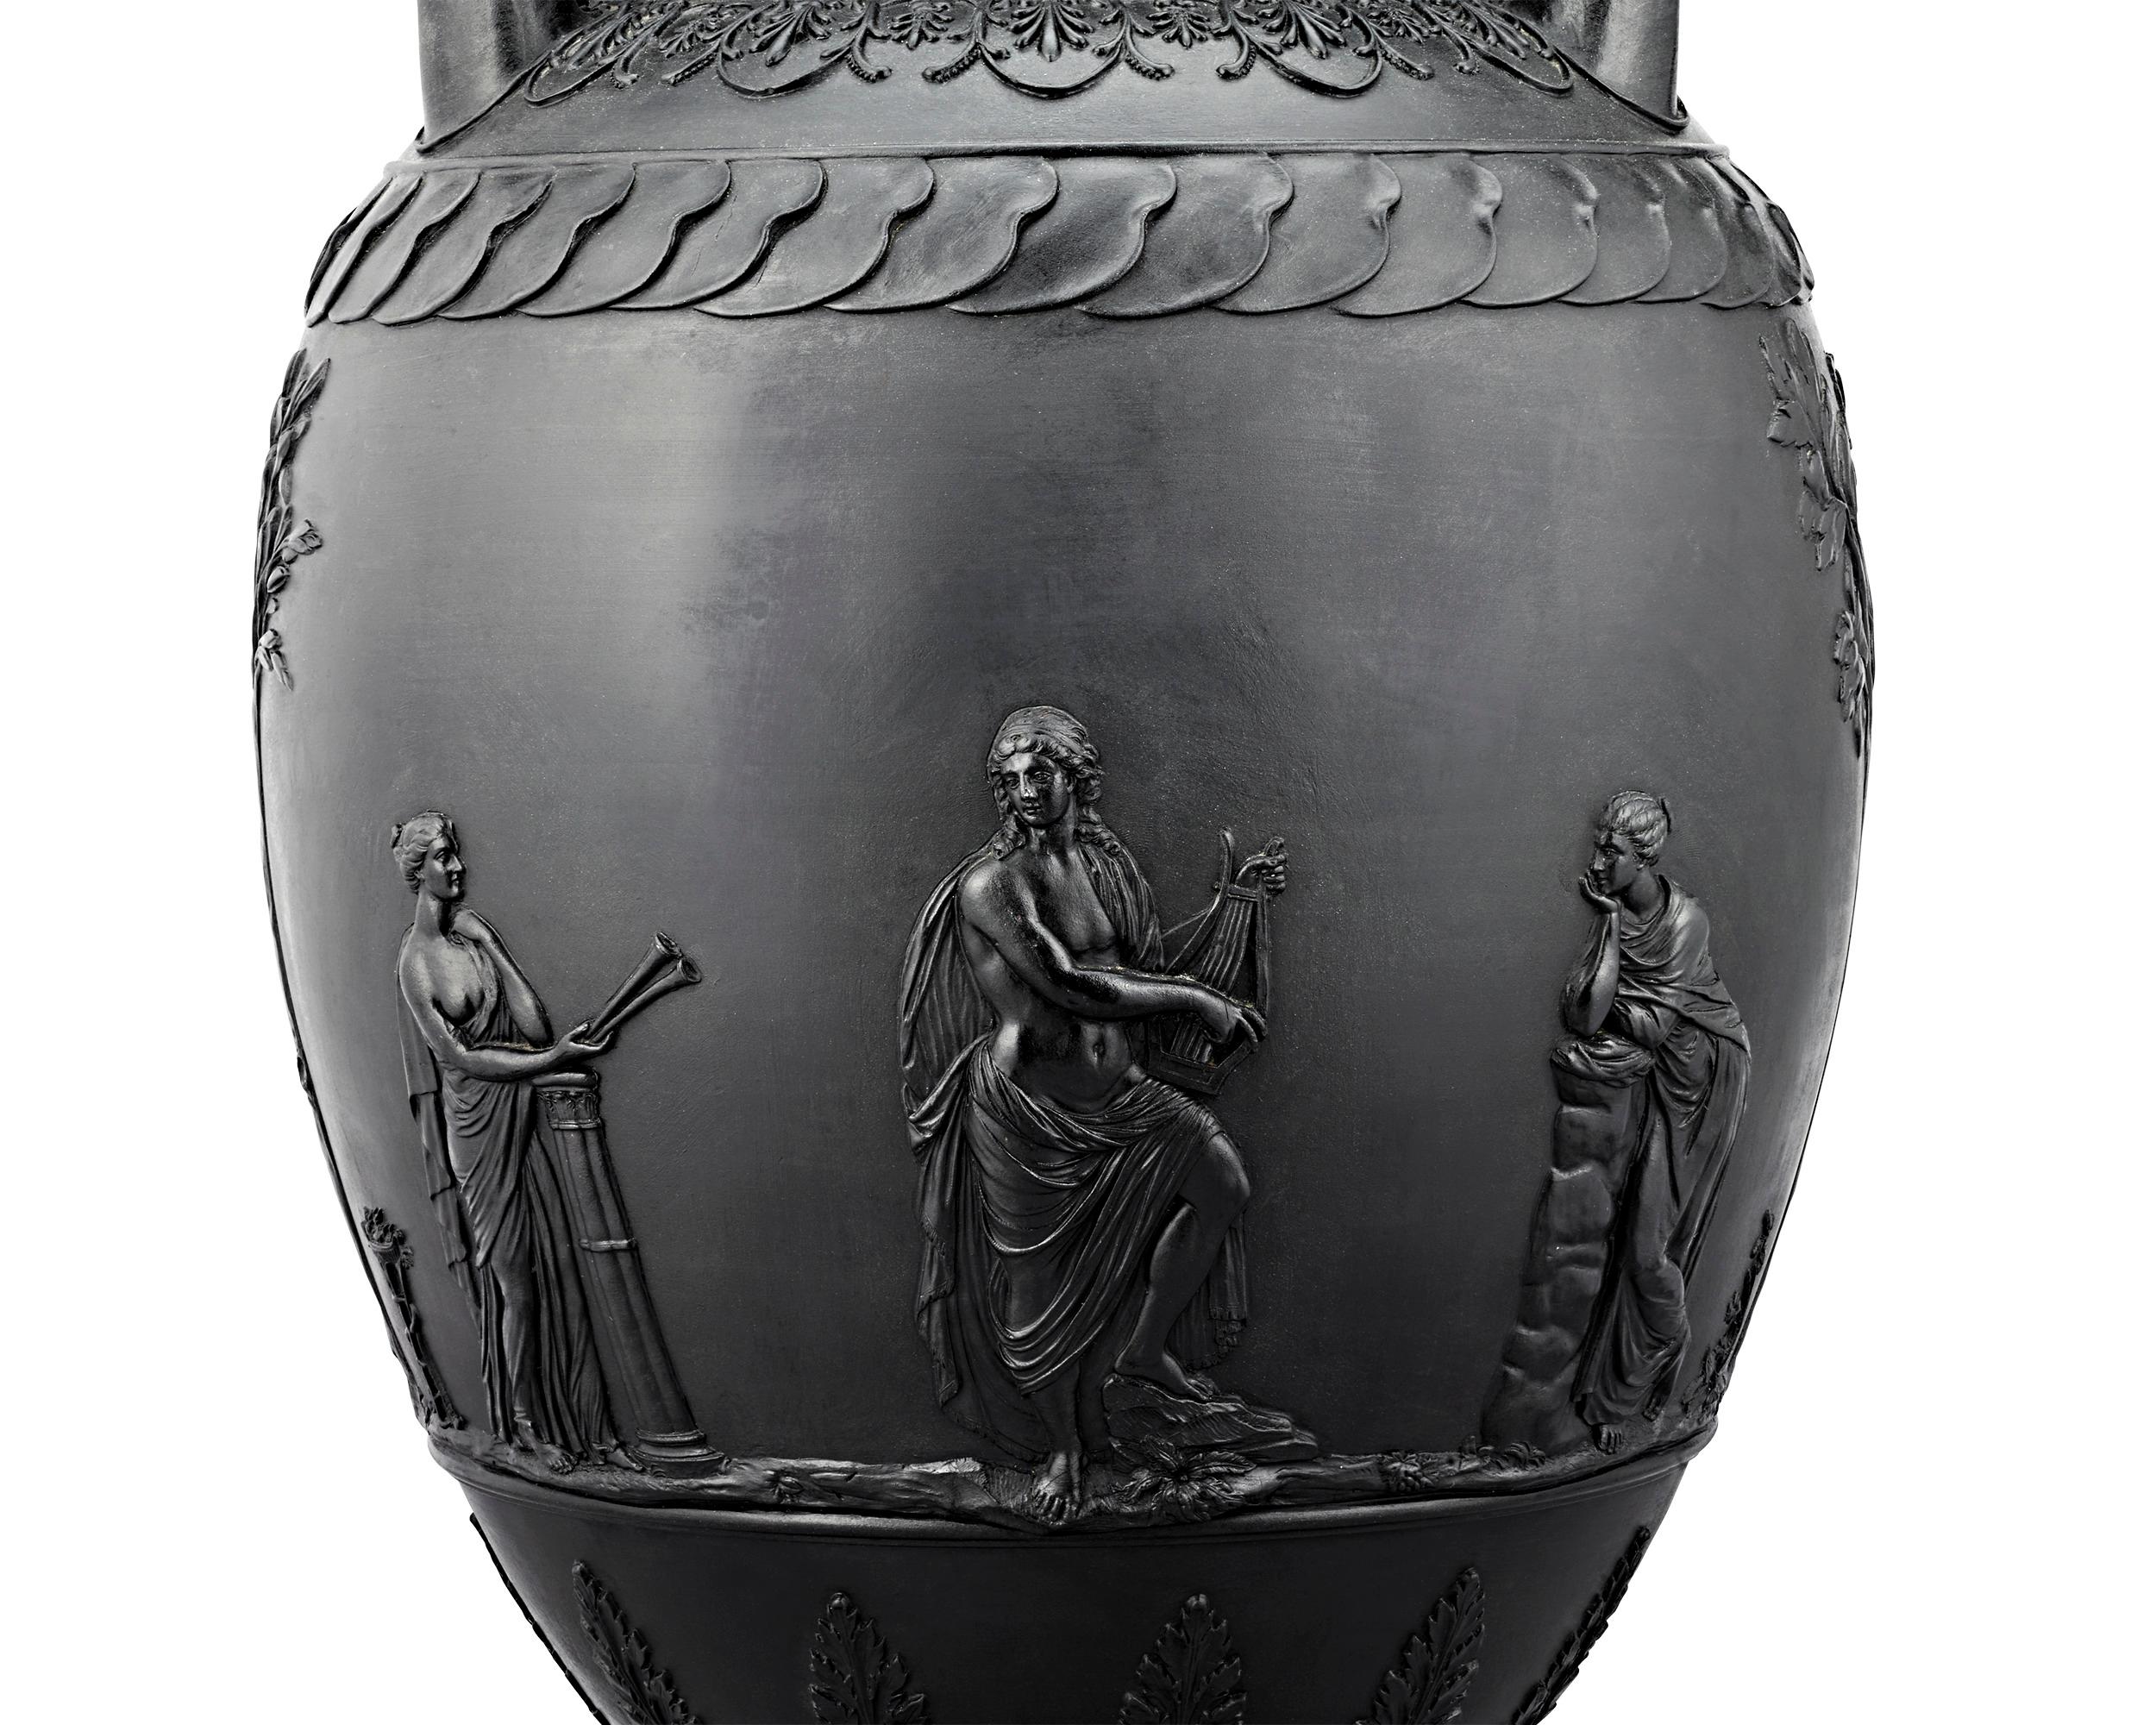 Wedgwood Black Basalt Two-Handled Urn In Excellent Condition For Sale In New Orleans, LA